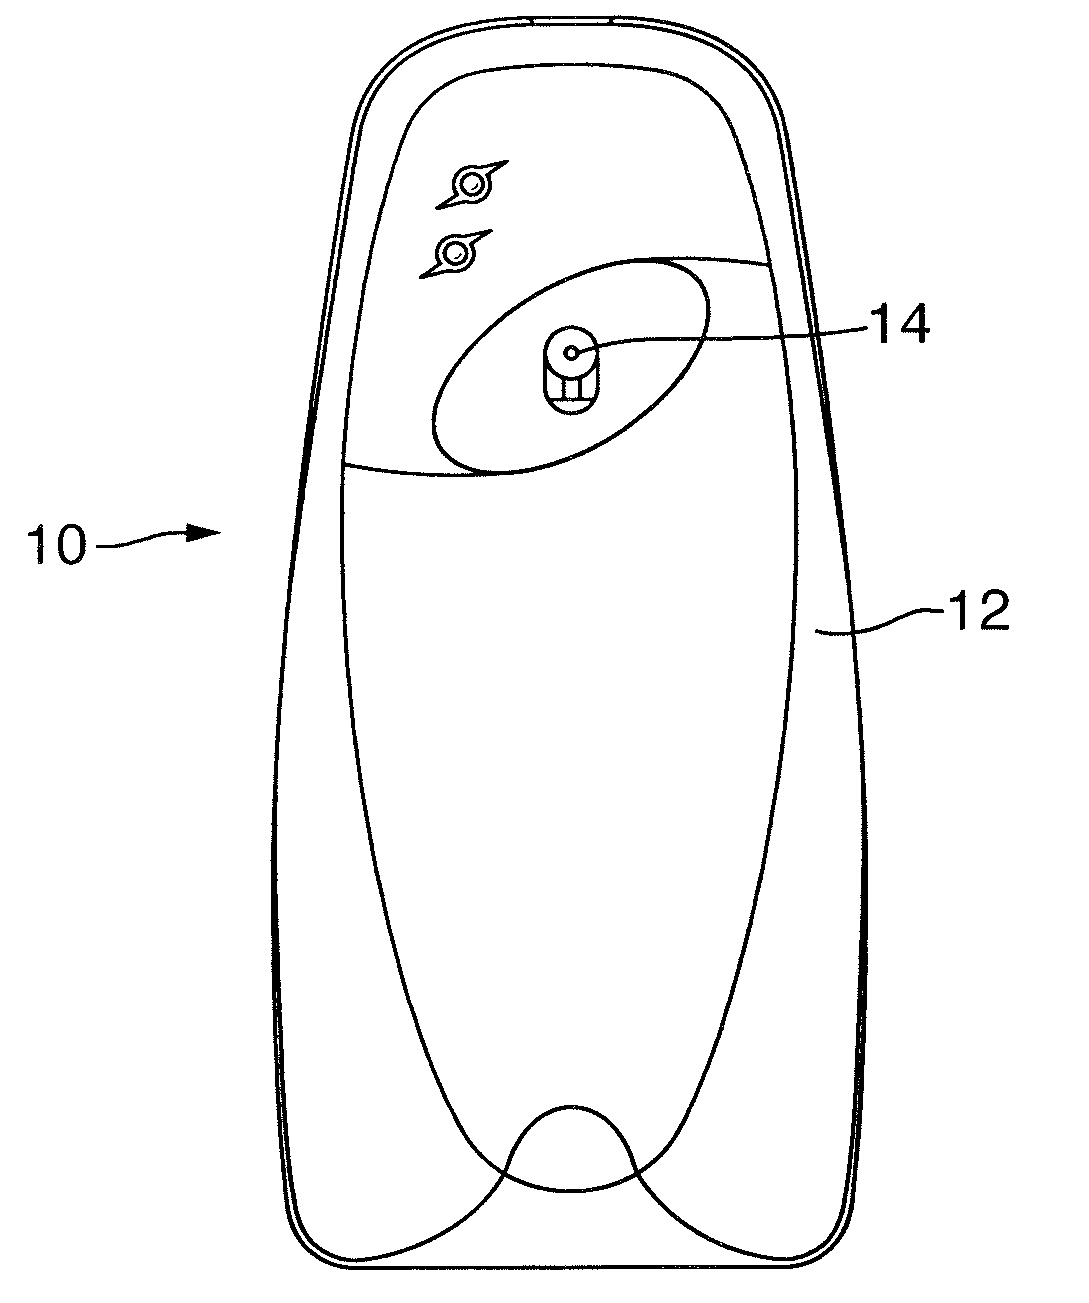 Devices and methods for emanating liquids